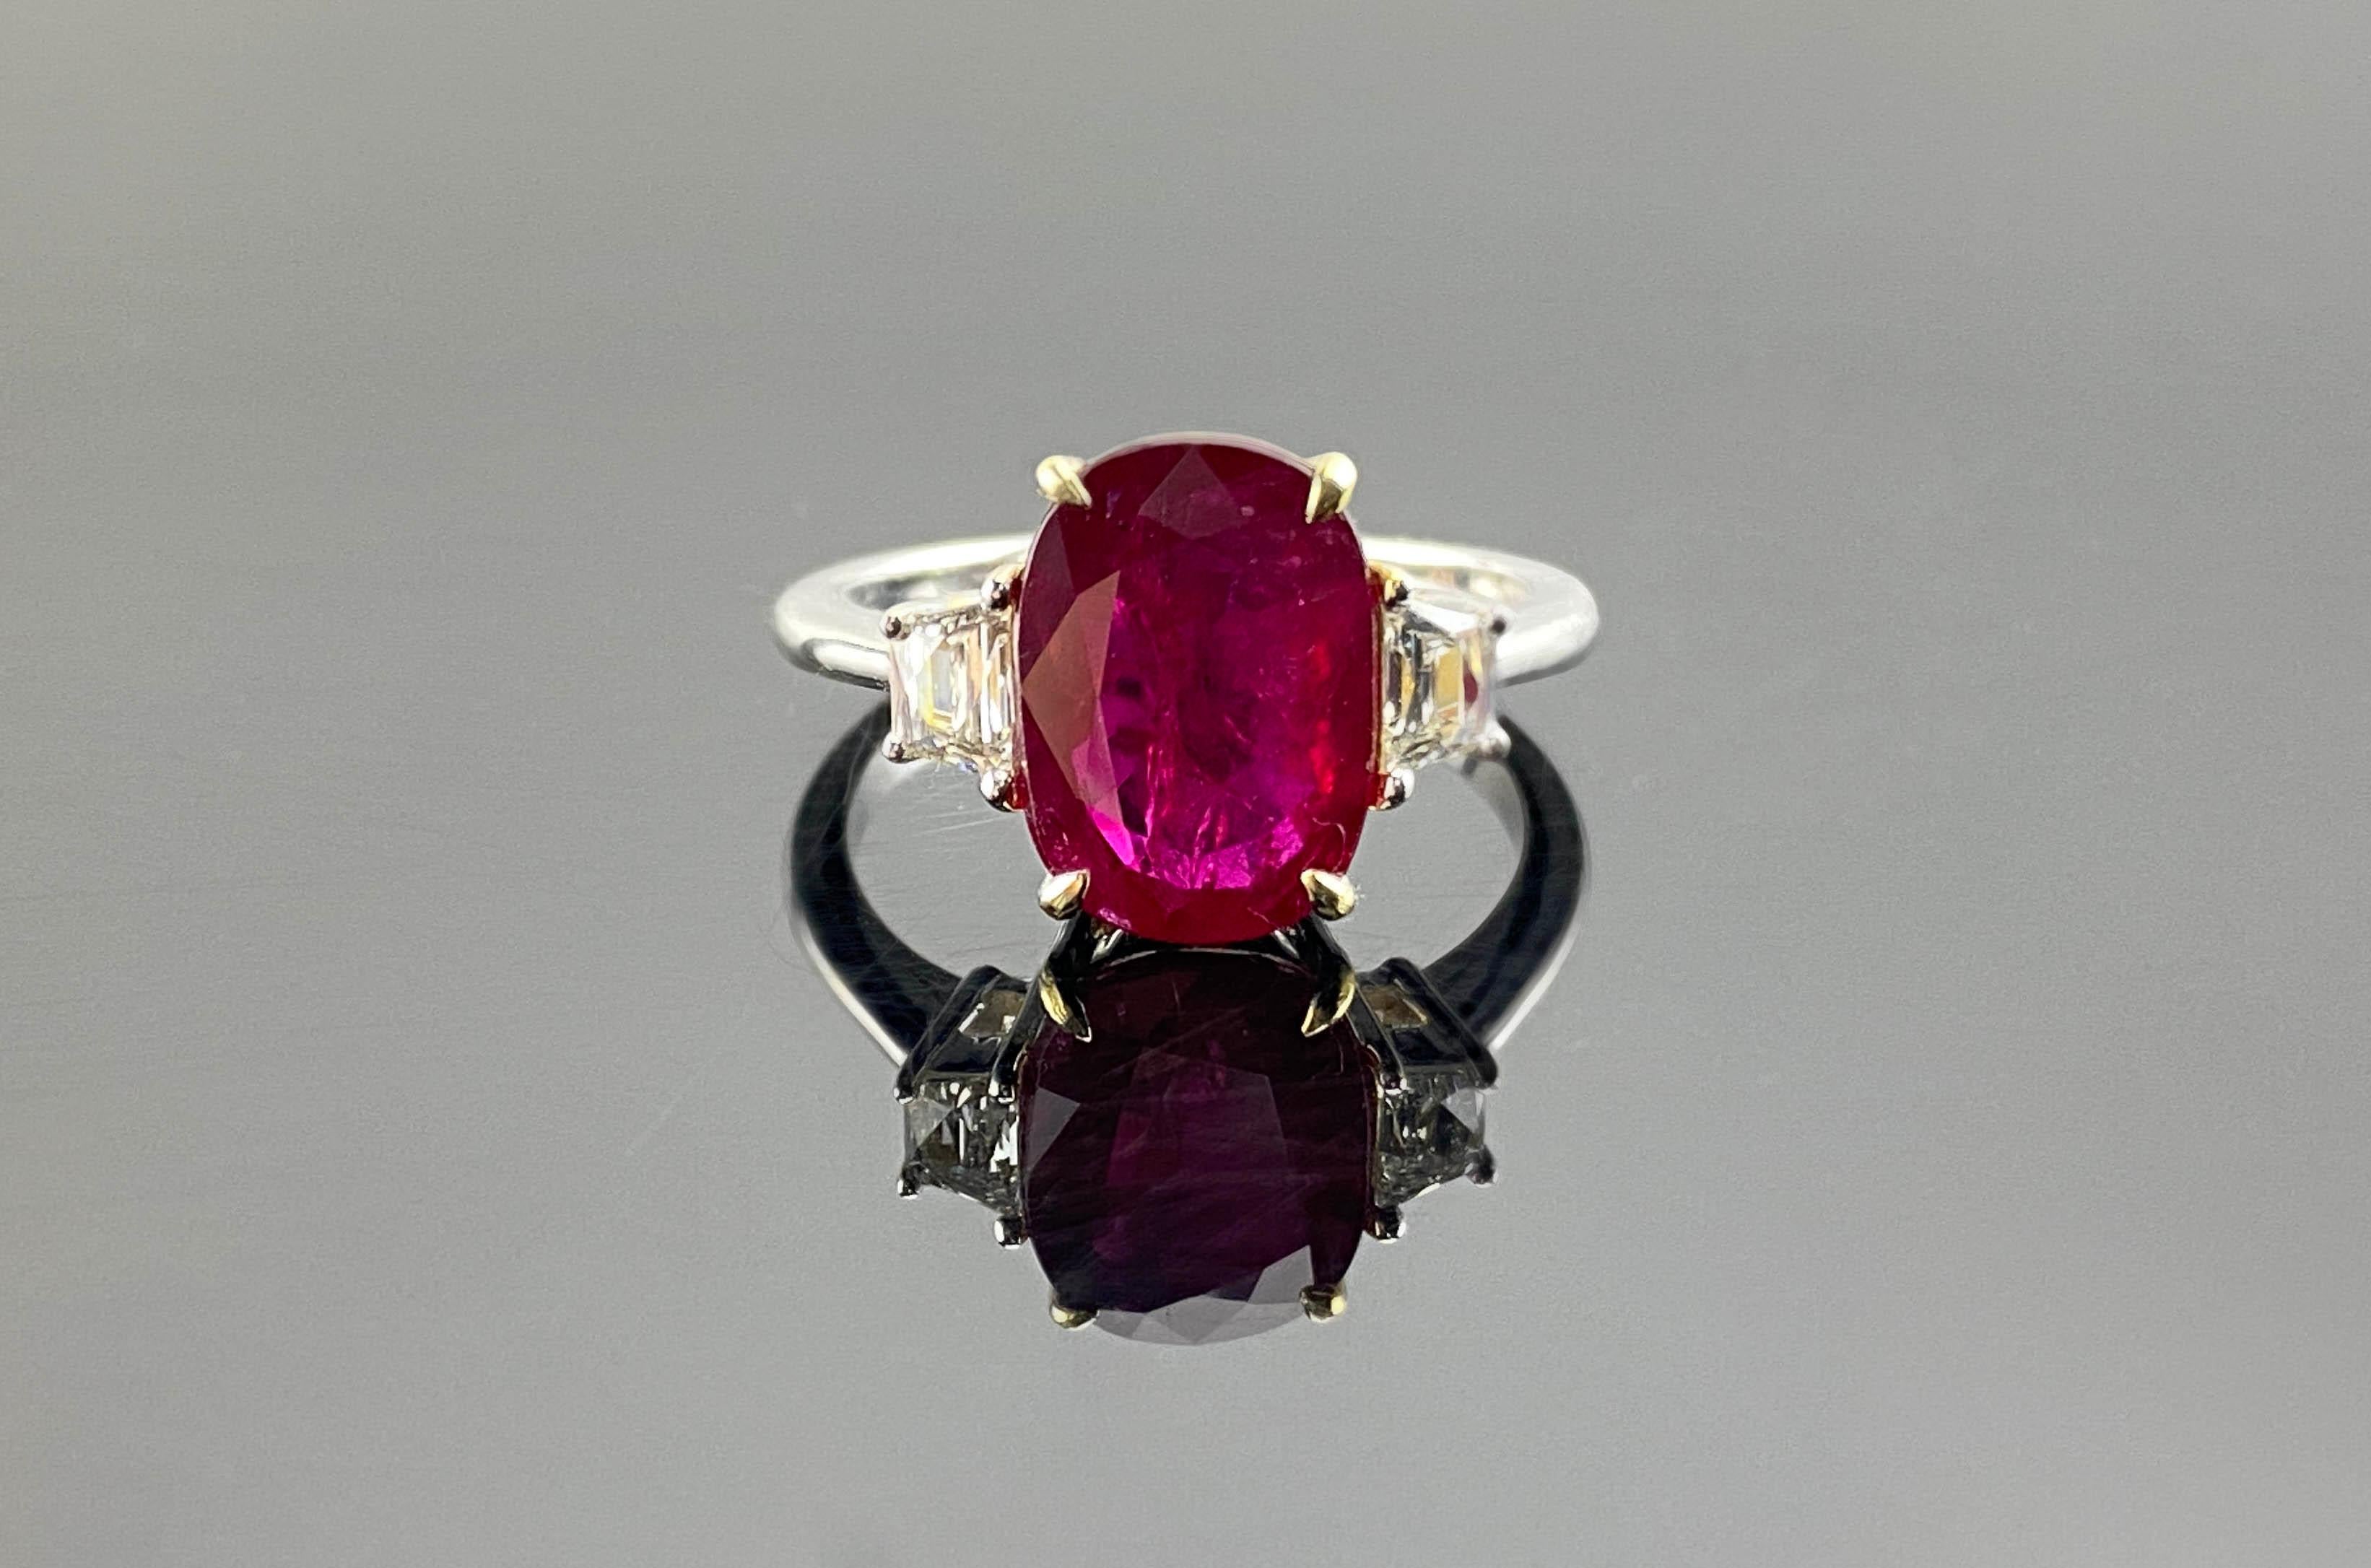 A classic 3.74 carat Burmese Ruby, with trapeze shaped White Diamonds, all set in solid 18K White Gold. The center stone oval shaped Ruby is transparent, with a beautiful vivid red color and great luster.
The ring is currently sized at US 7, can be